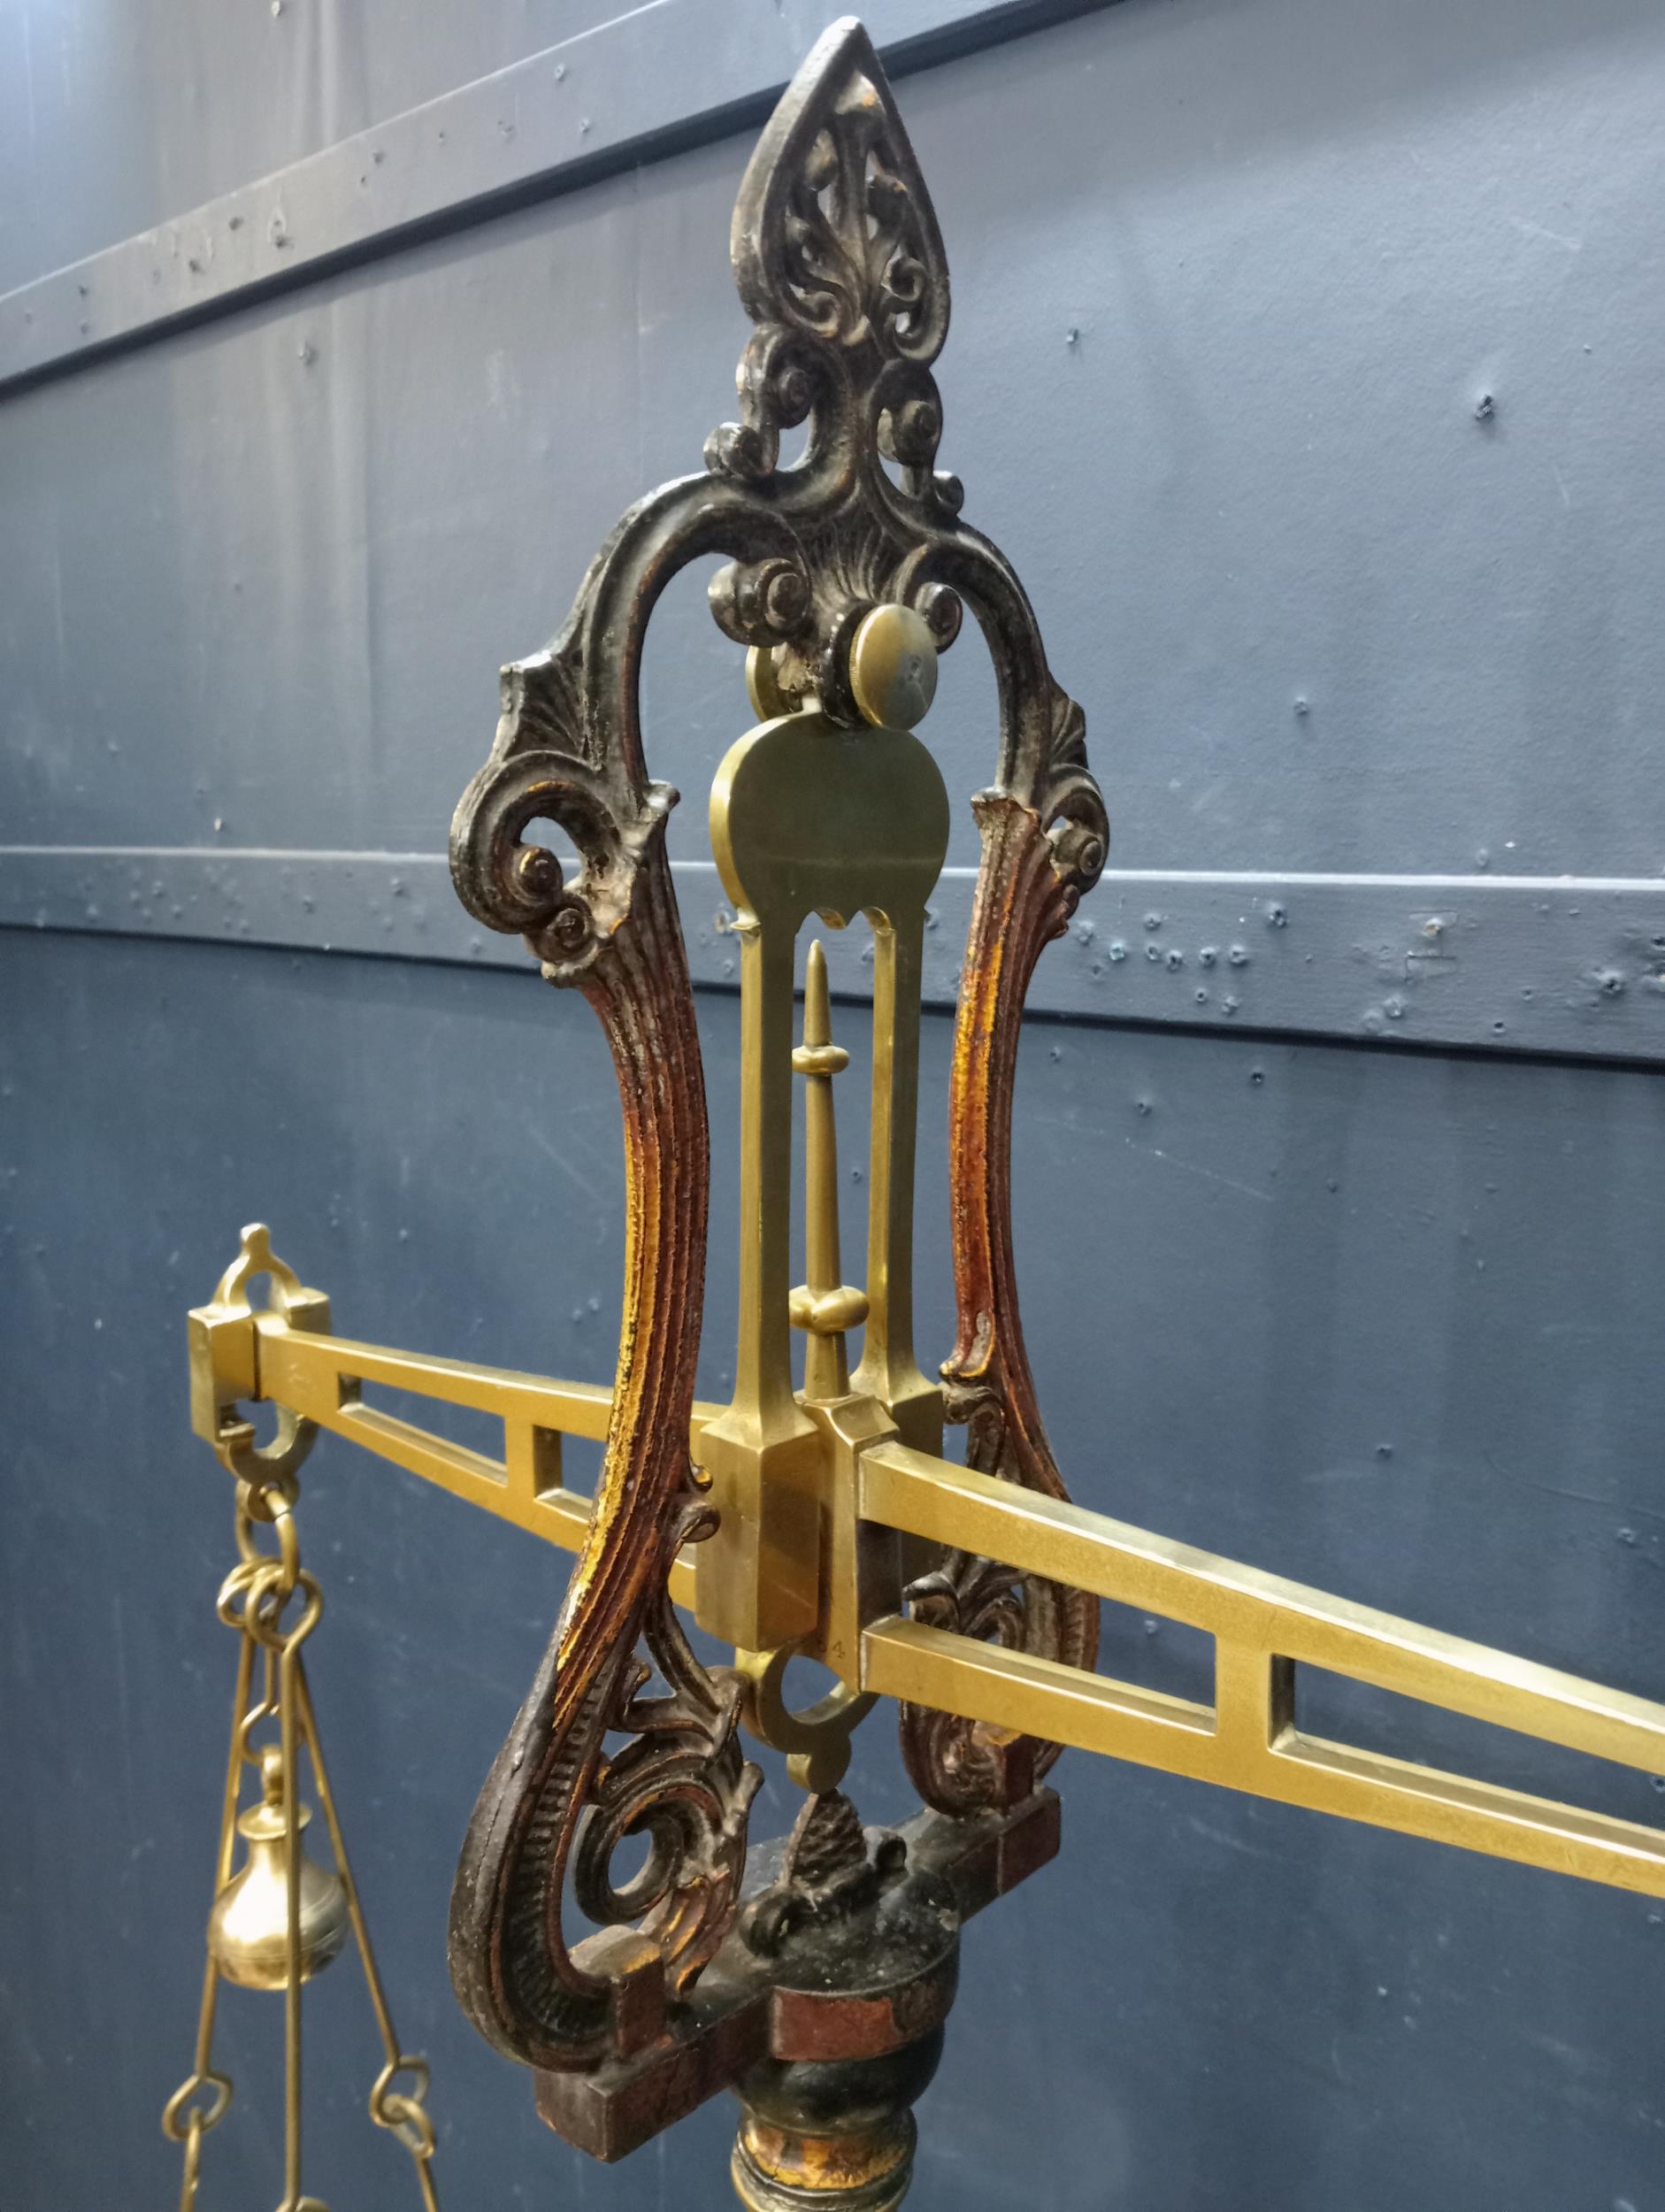 19th C. cast brass weighing scales {H 200cm x W 80cm x D 35cm }. - Image 3 of 3